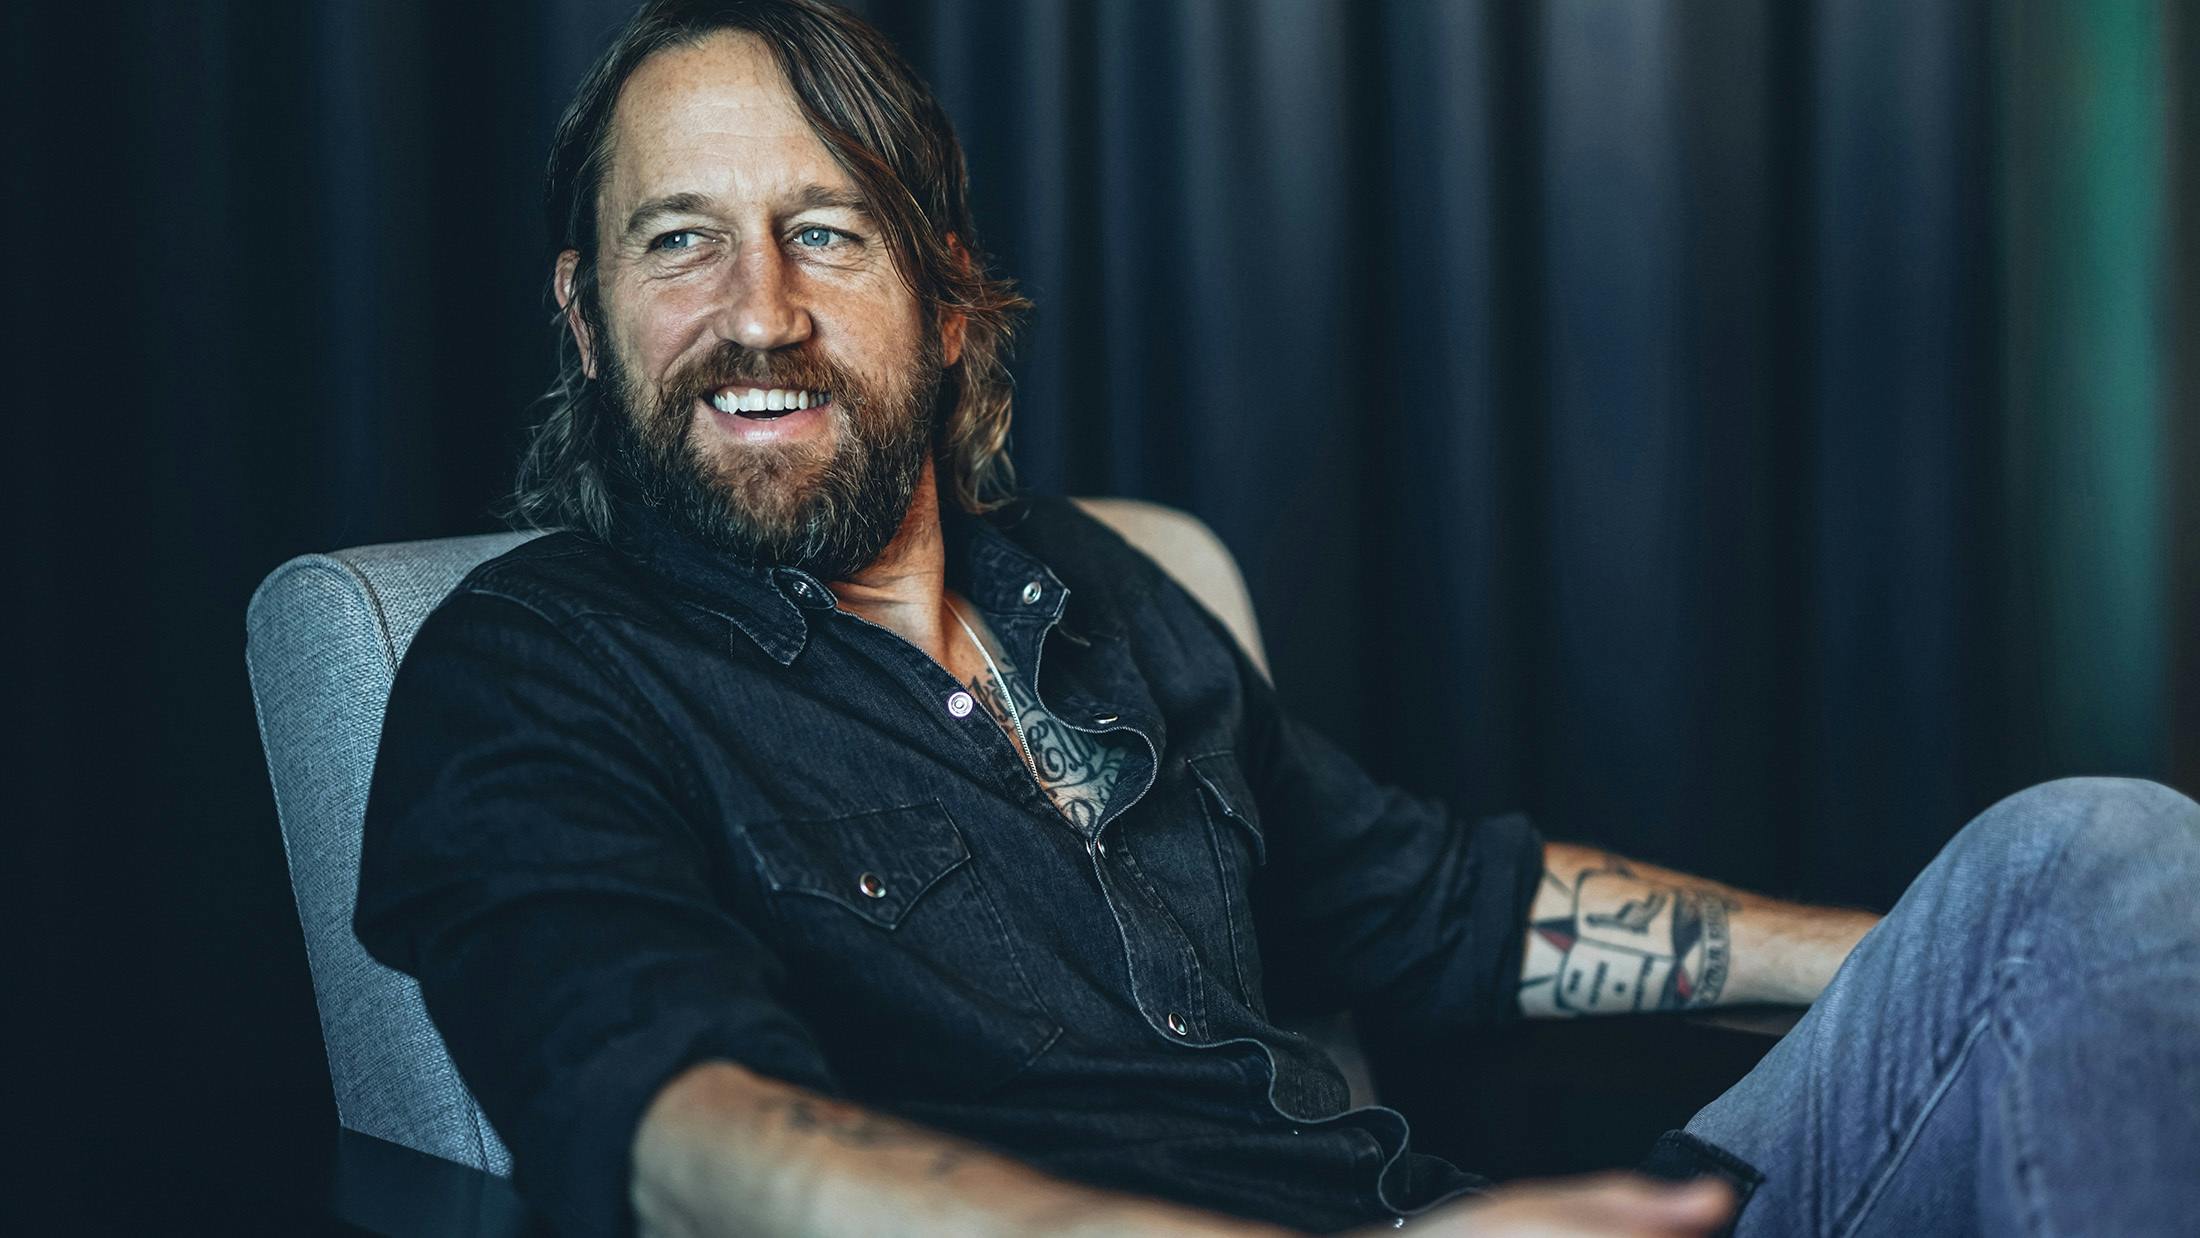 Foo Fighters' Chris Shiflett: The 10 Songs That Changed My Life